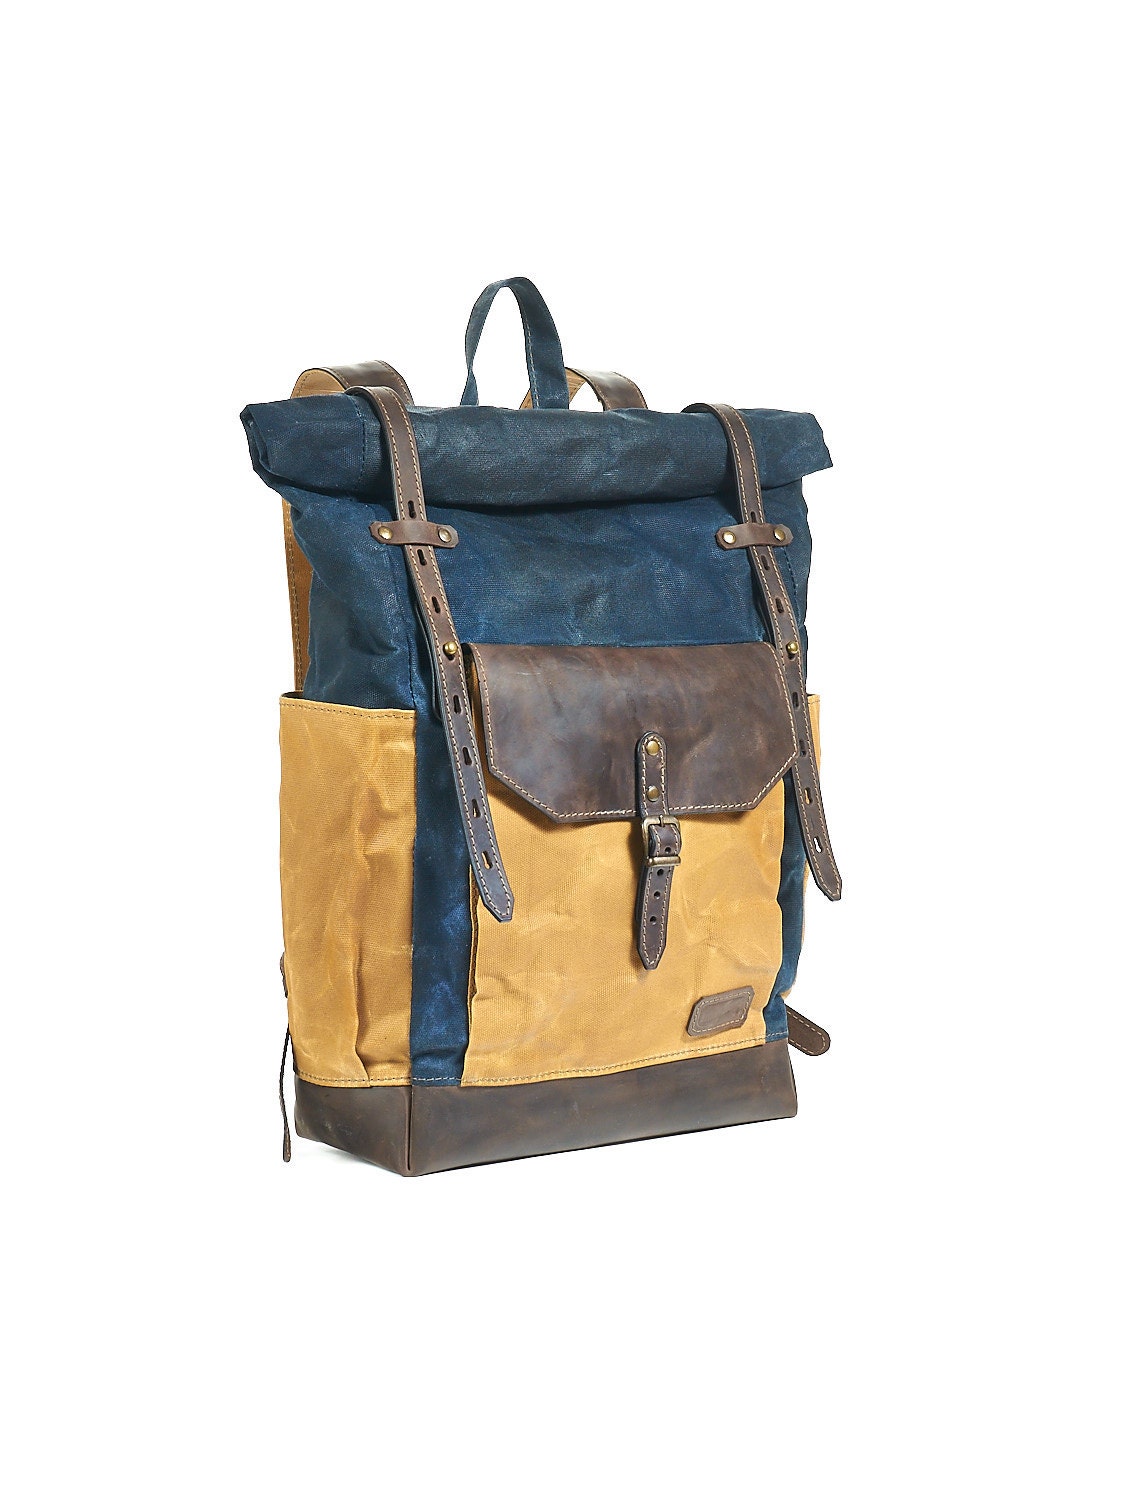 Navy blue waxed canvas backpack. Hipster backpack. Leather